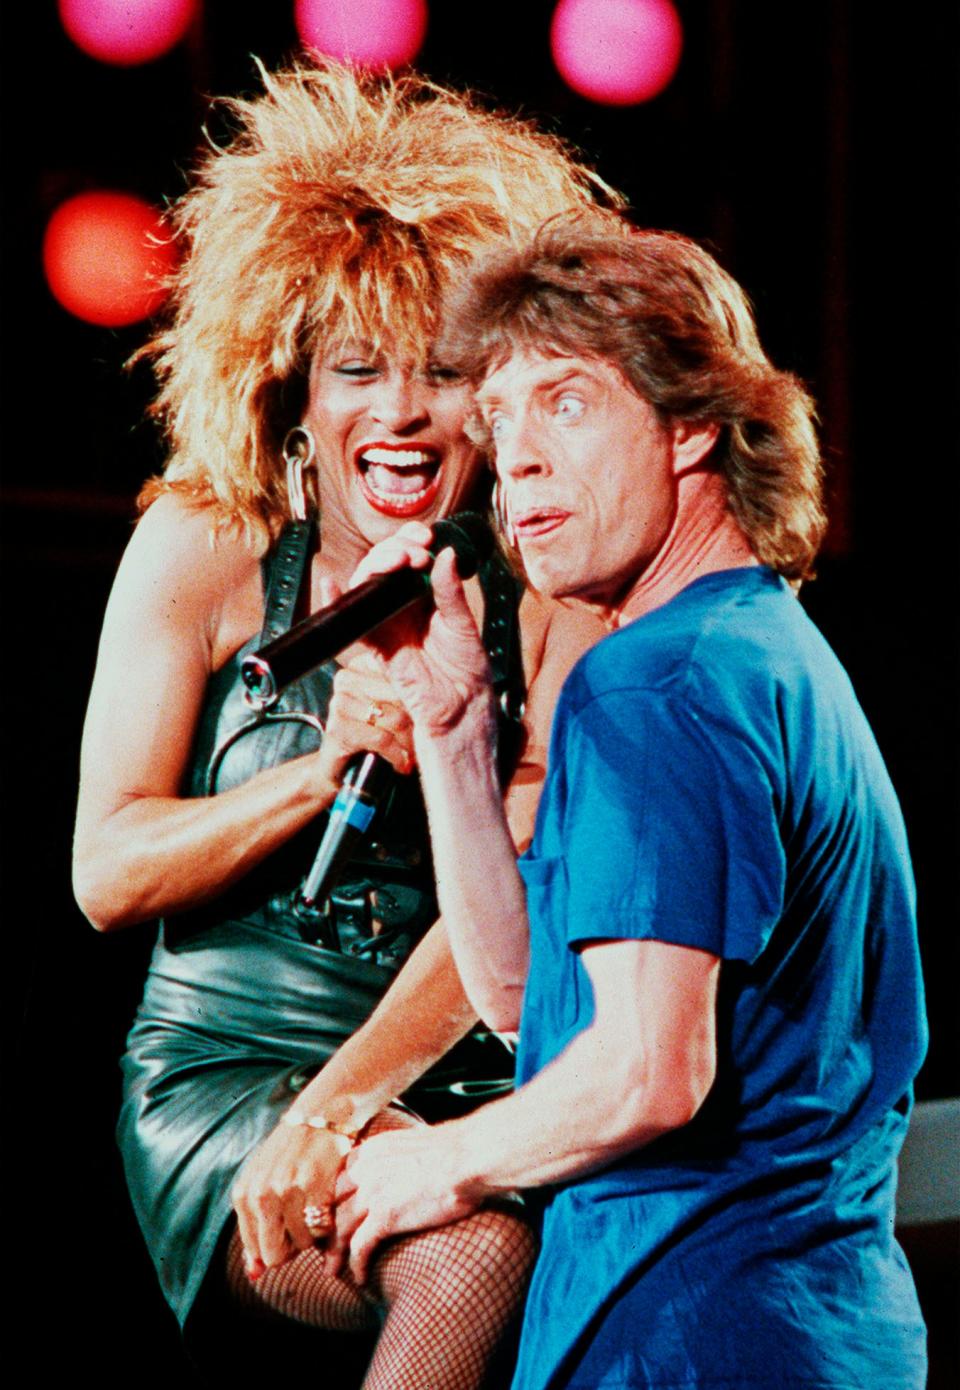 Tina Turner and Mick Jagger perform at the Live Aid concert Saturday night in Philadelphia on July 13, 1985. (AP)